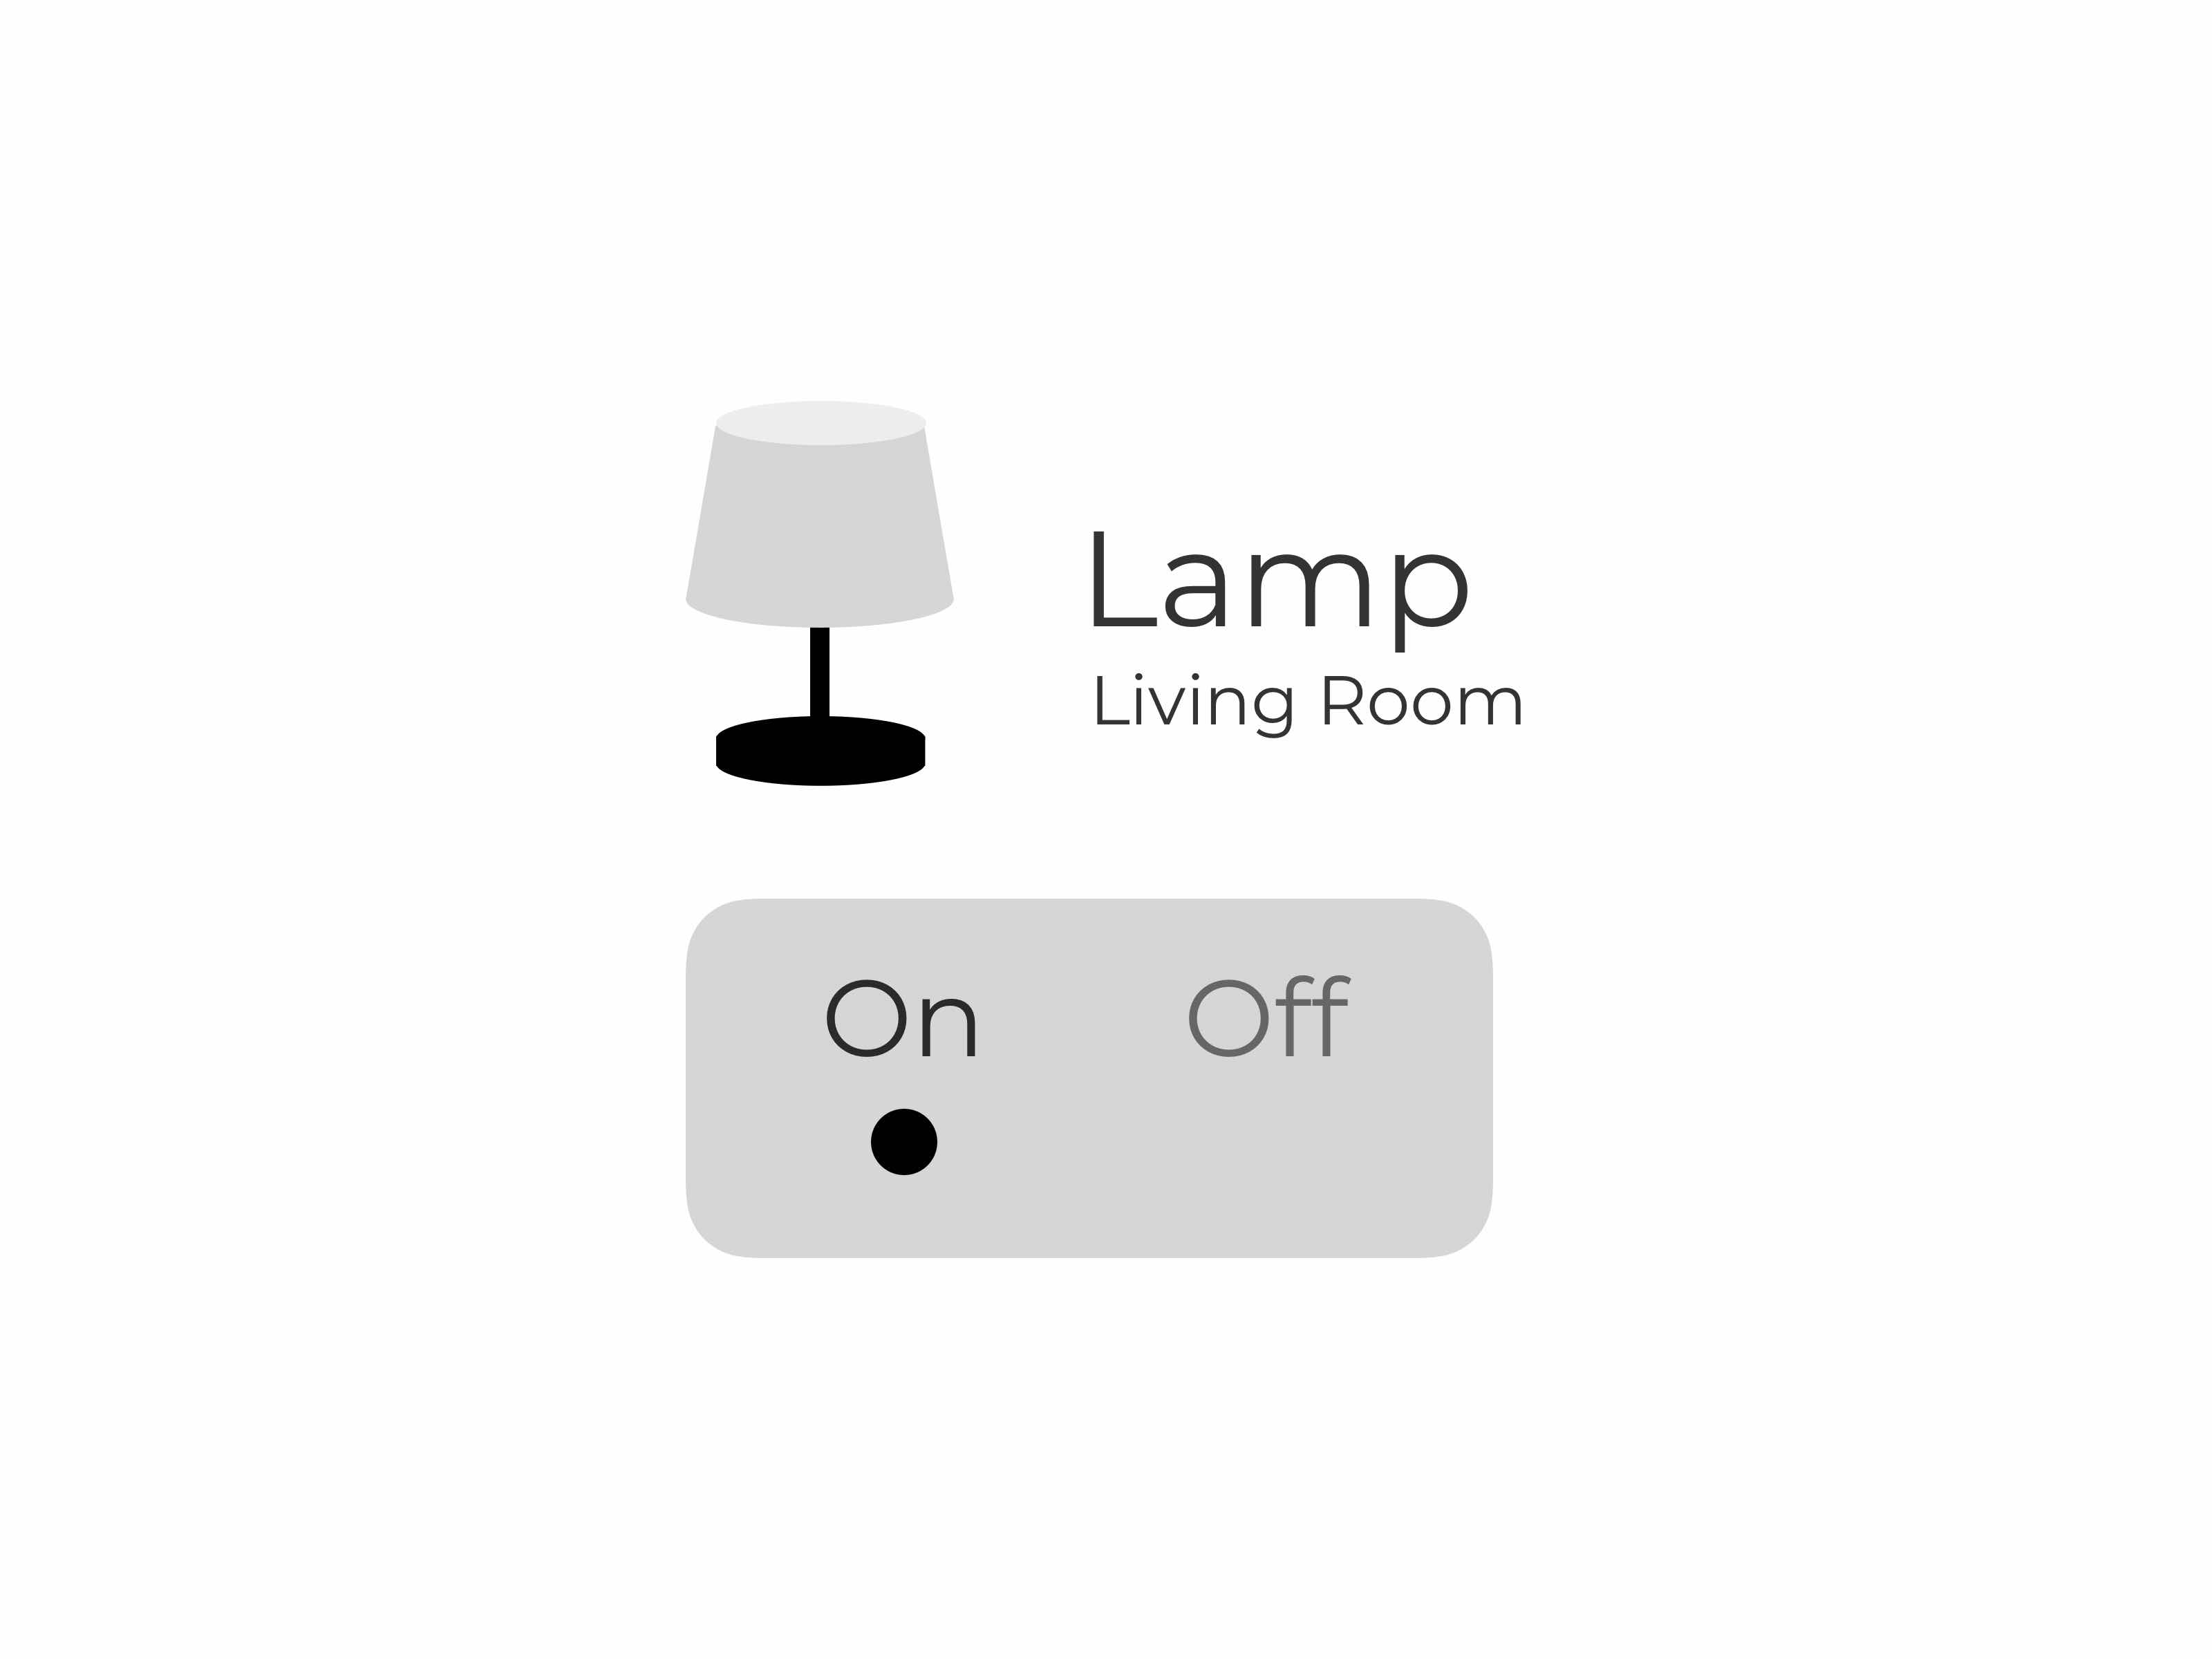 lamp graphic with on and off toggle